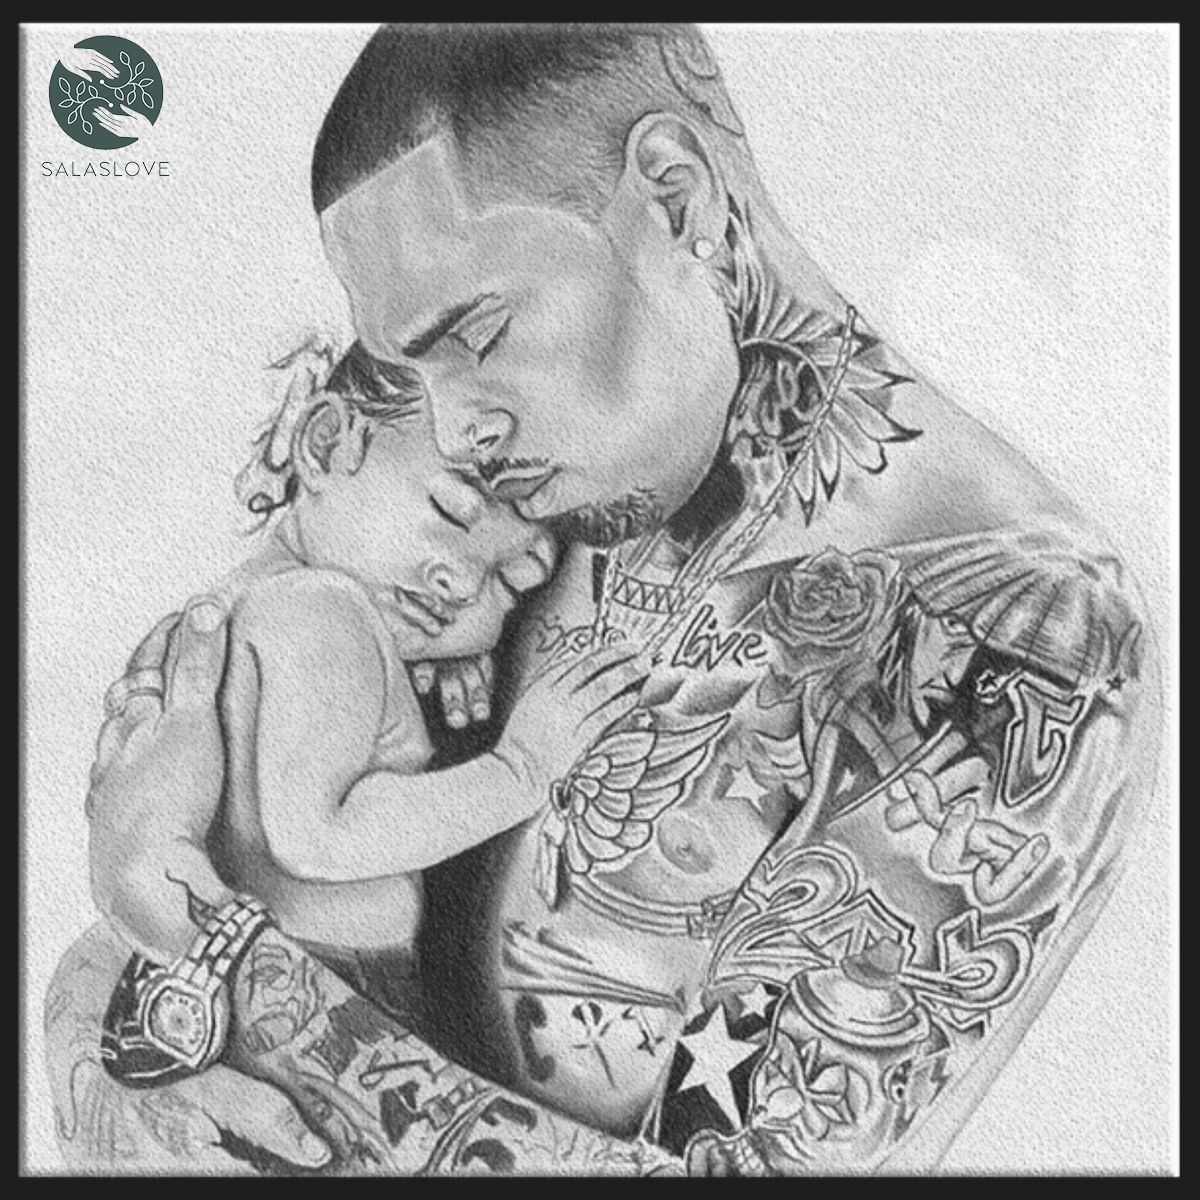 Chris Brown and Royalty Daughter T-shirt